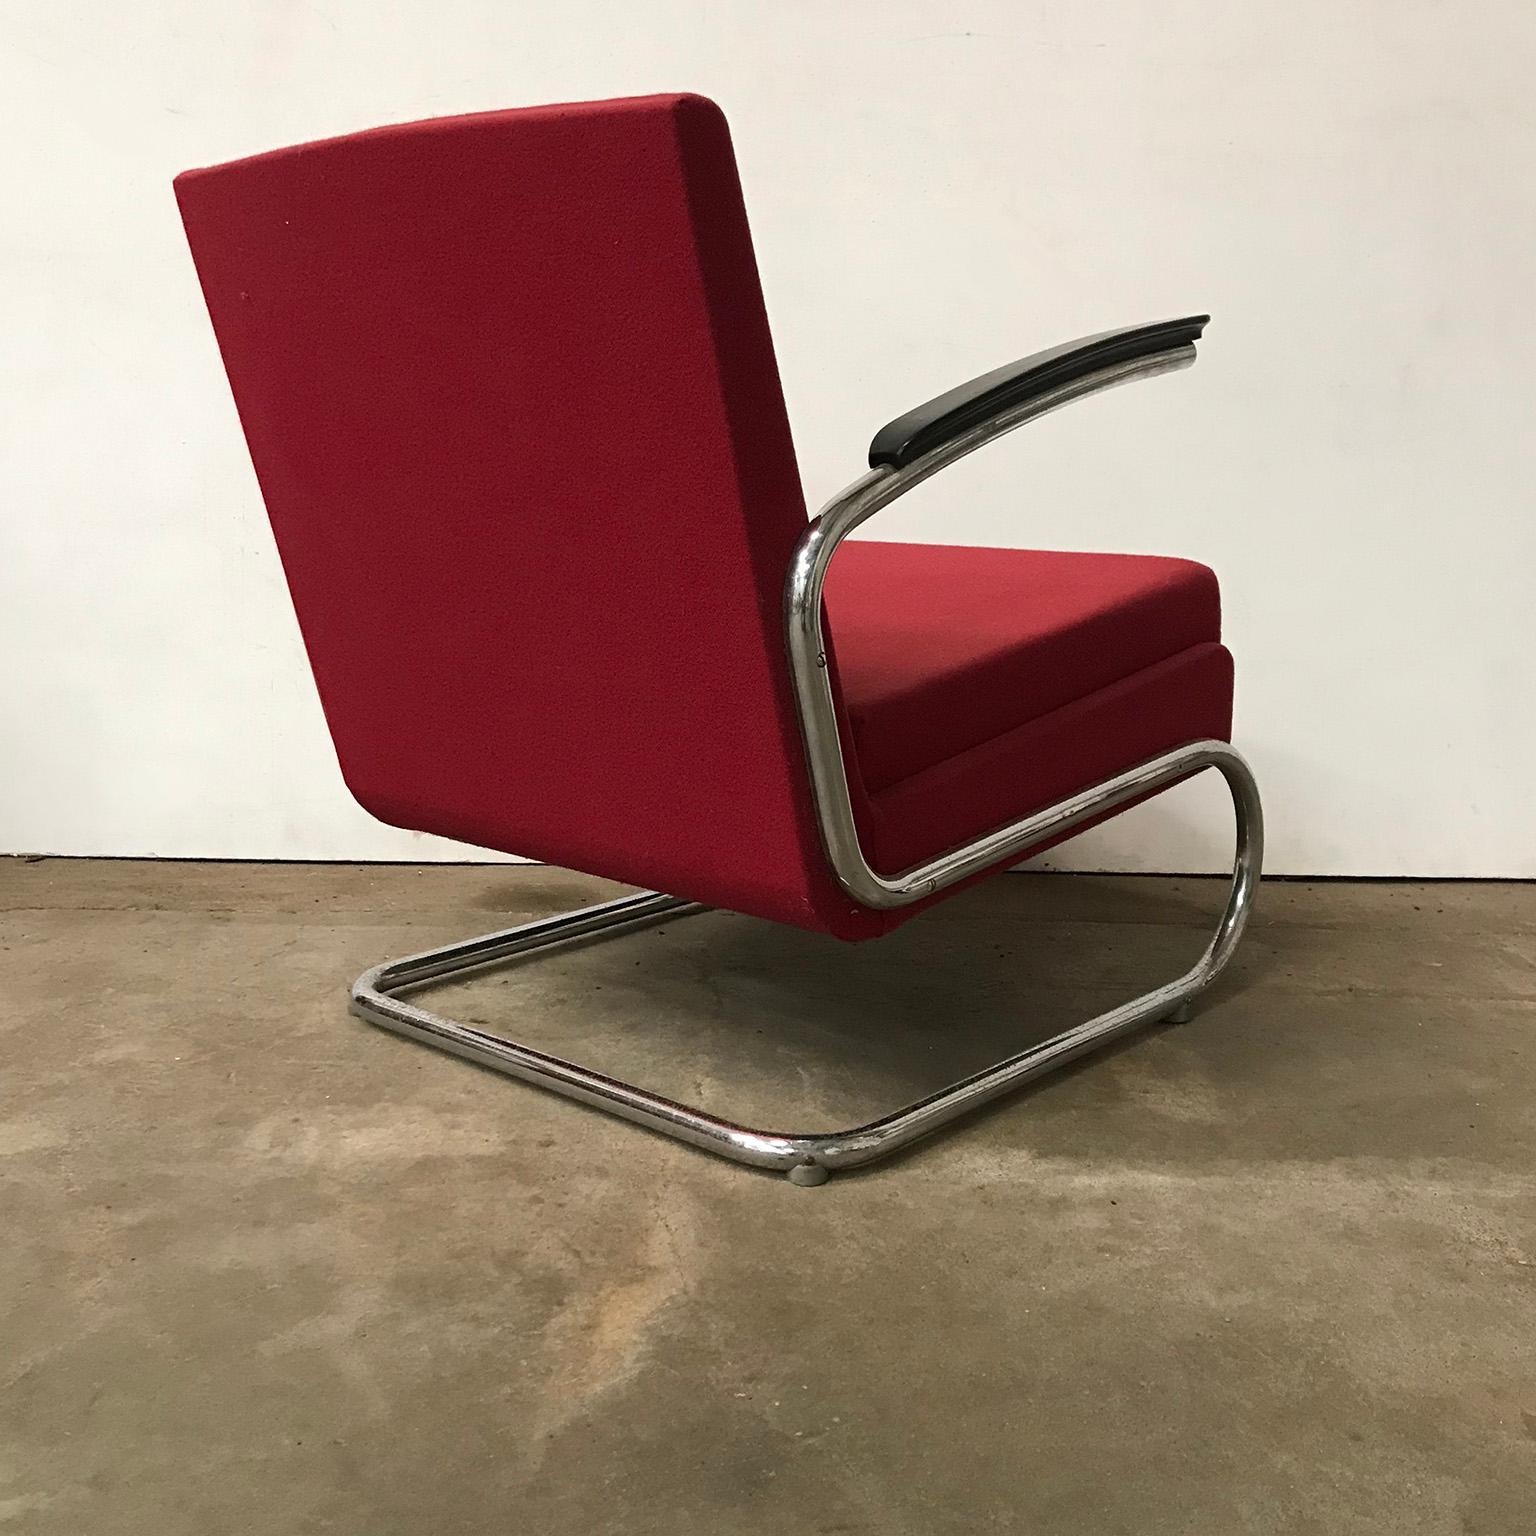 Mid-20th Century Dutch Tubular Easy Chair in Burgundy Red and Black Armrests, circa 1930